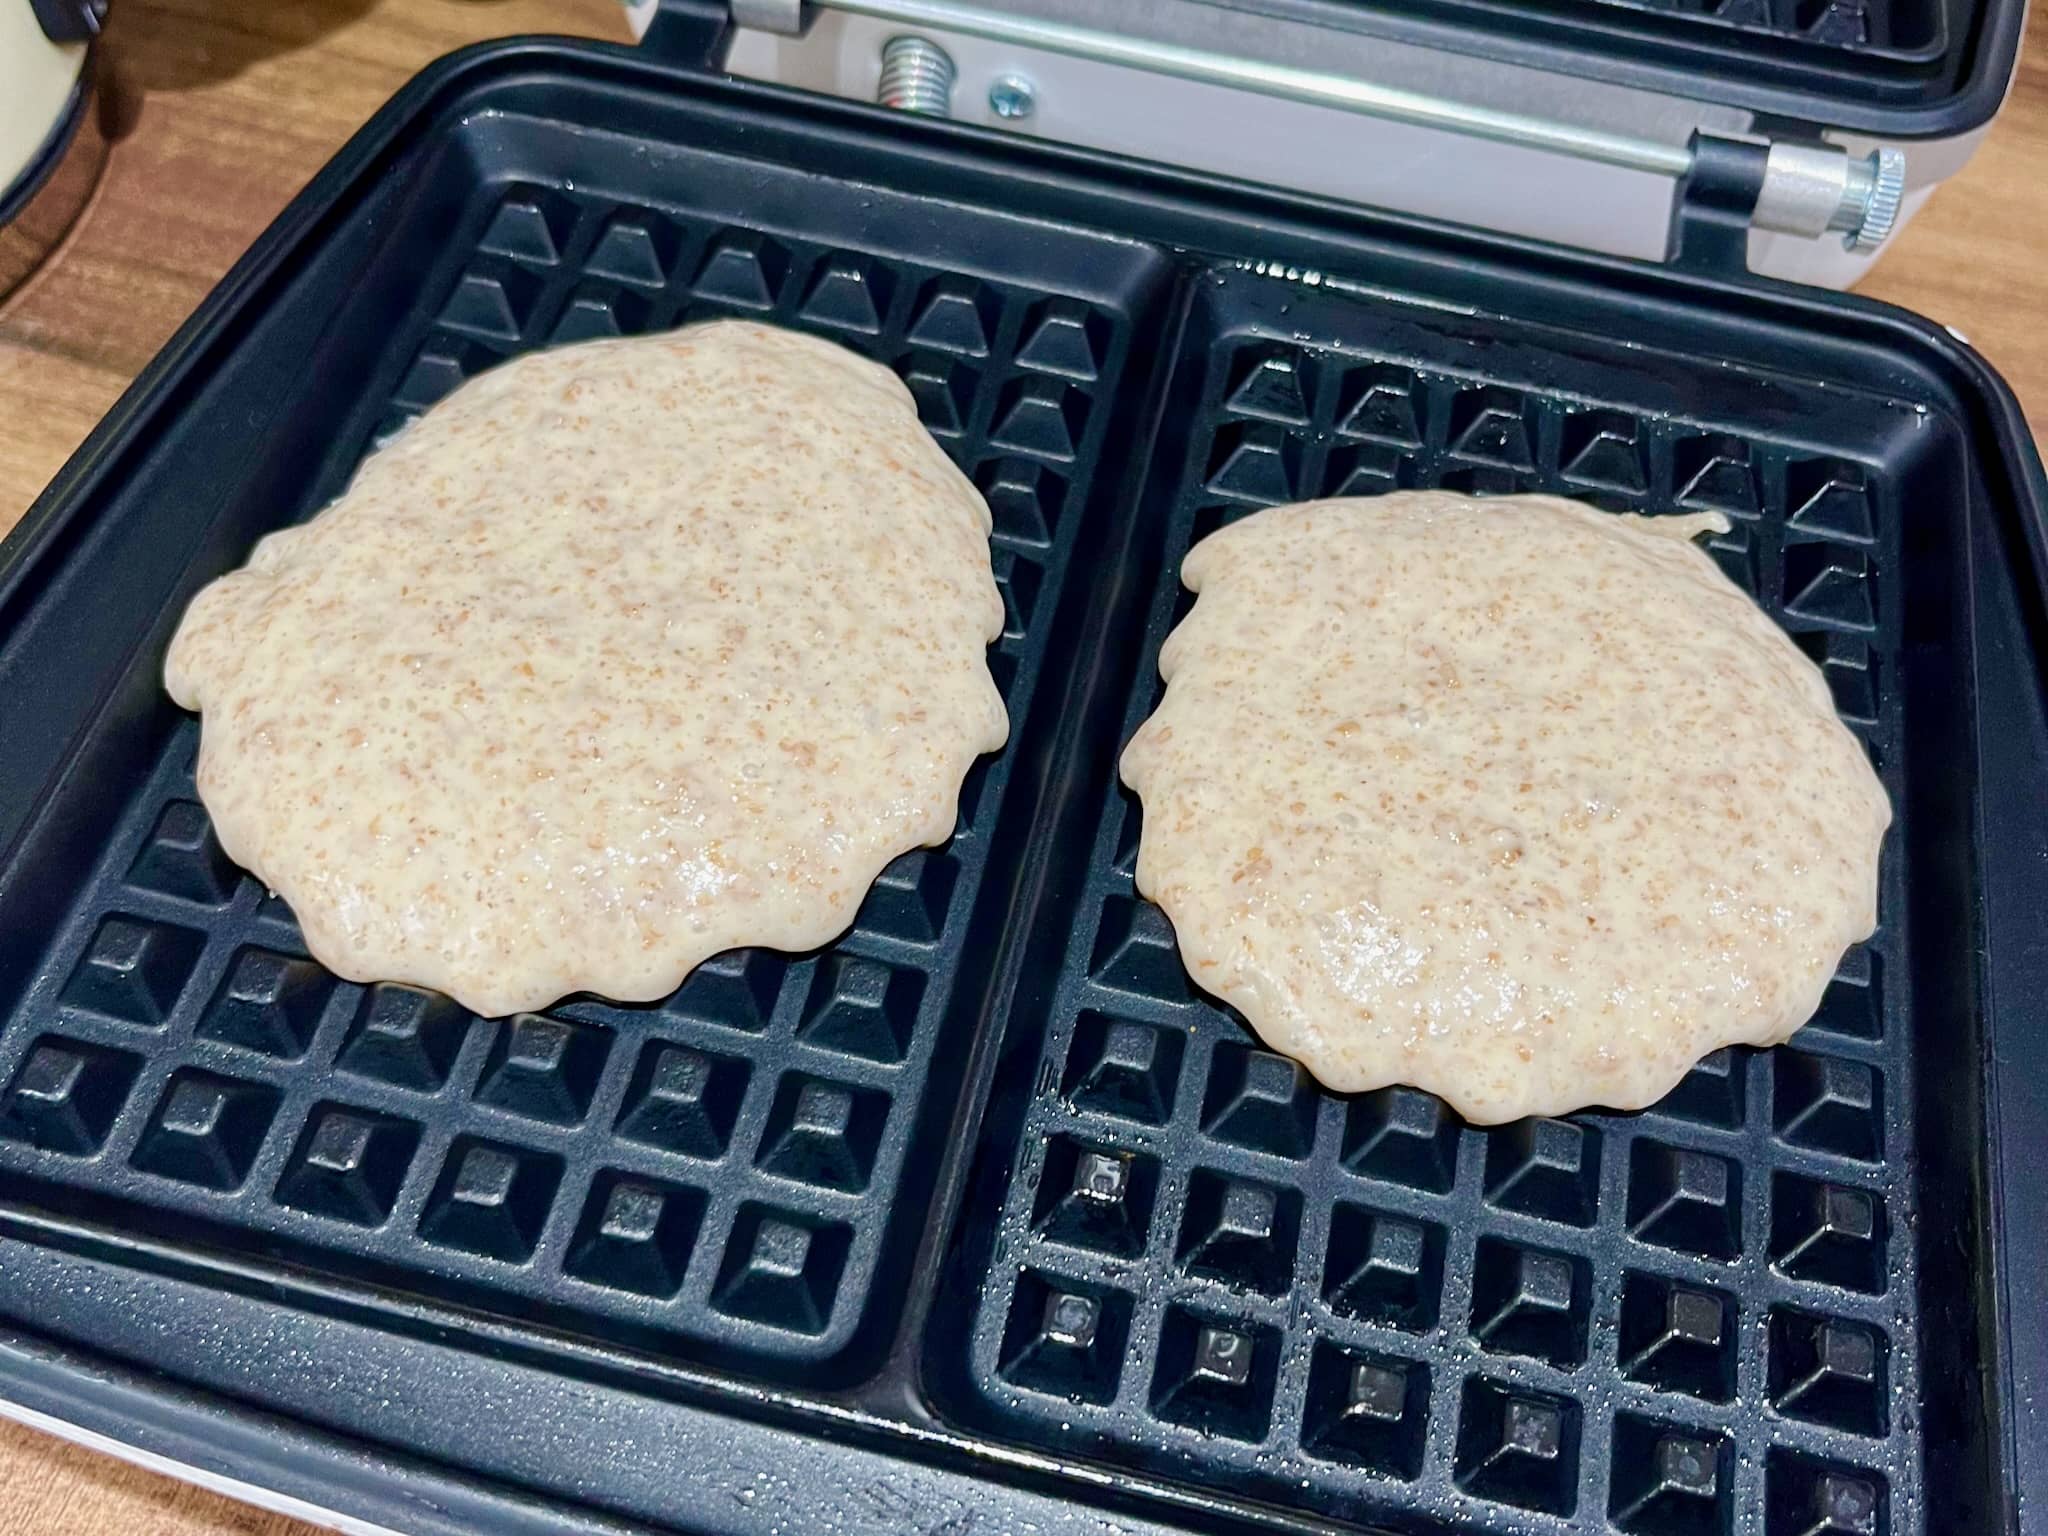 Waffles batter placed in waffle iron